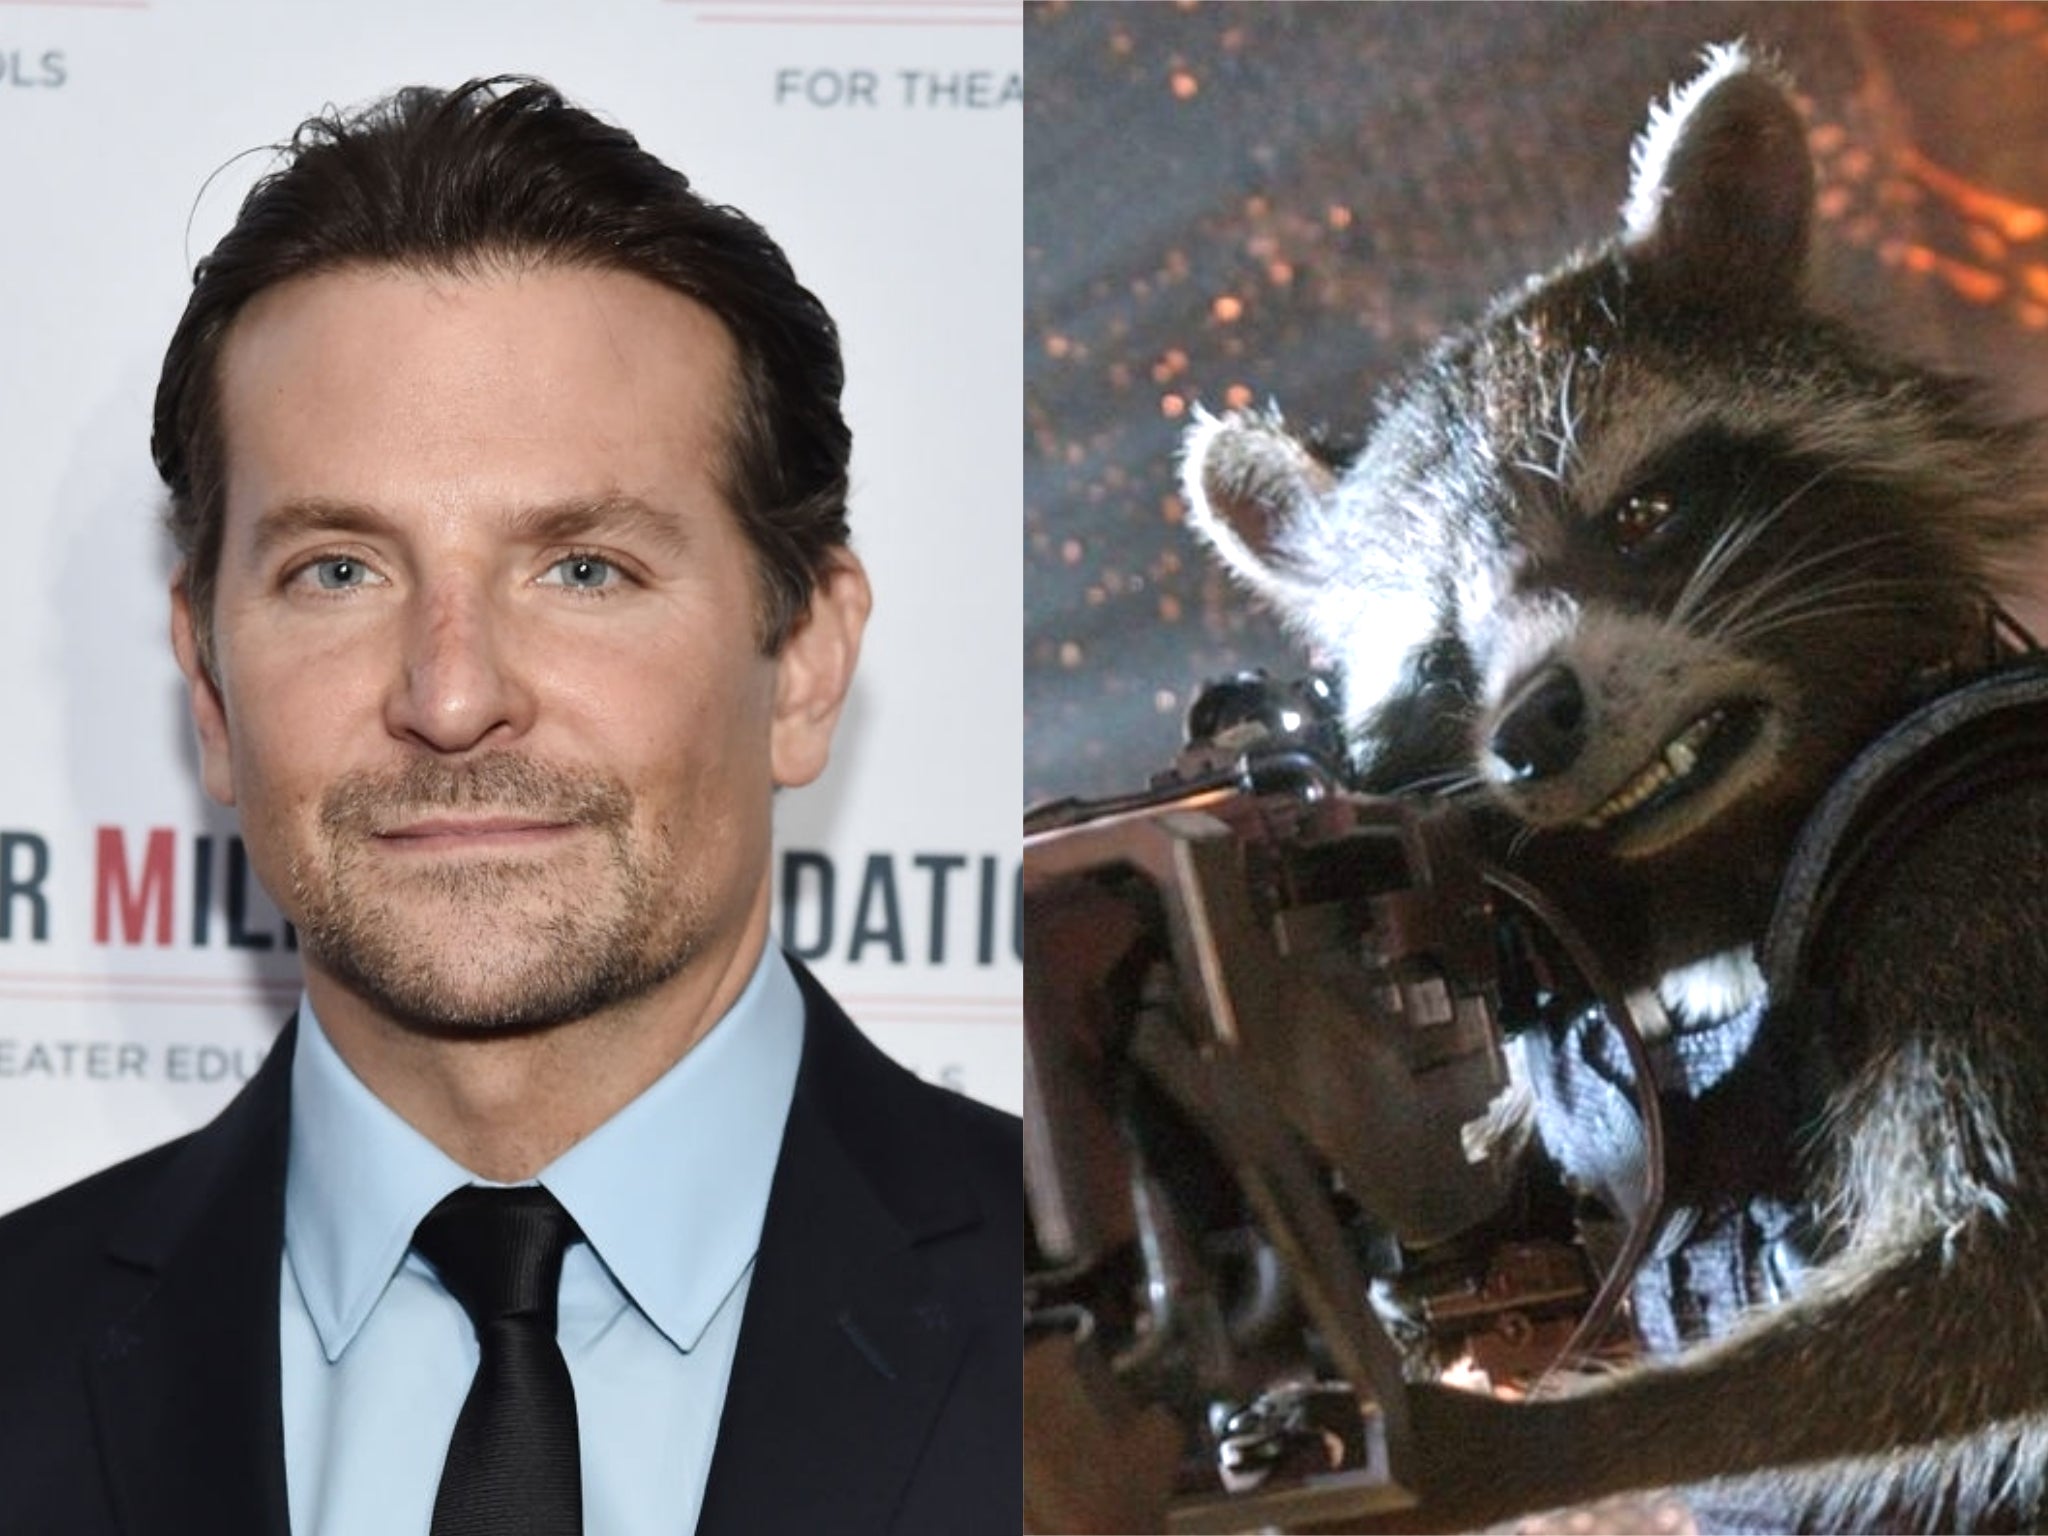 Marvel did not like the performance of Bradley Cooper, Guardians of the Galaxy, reveals James Gunn